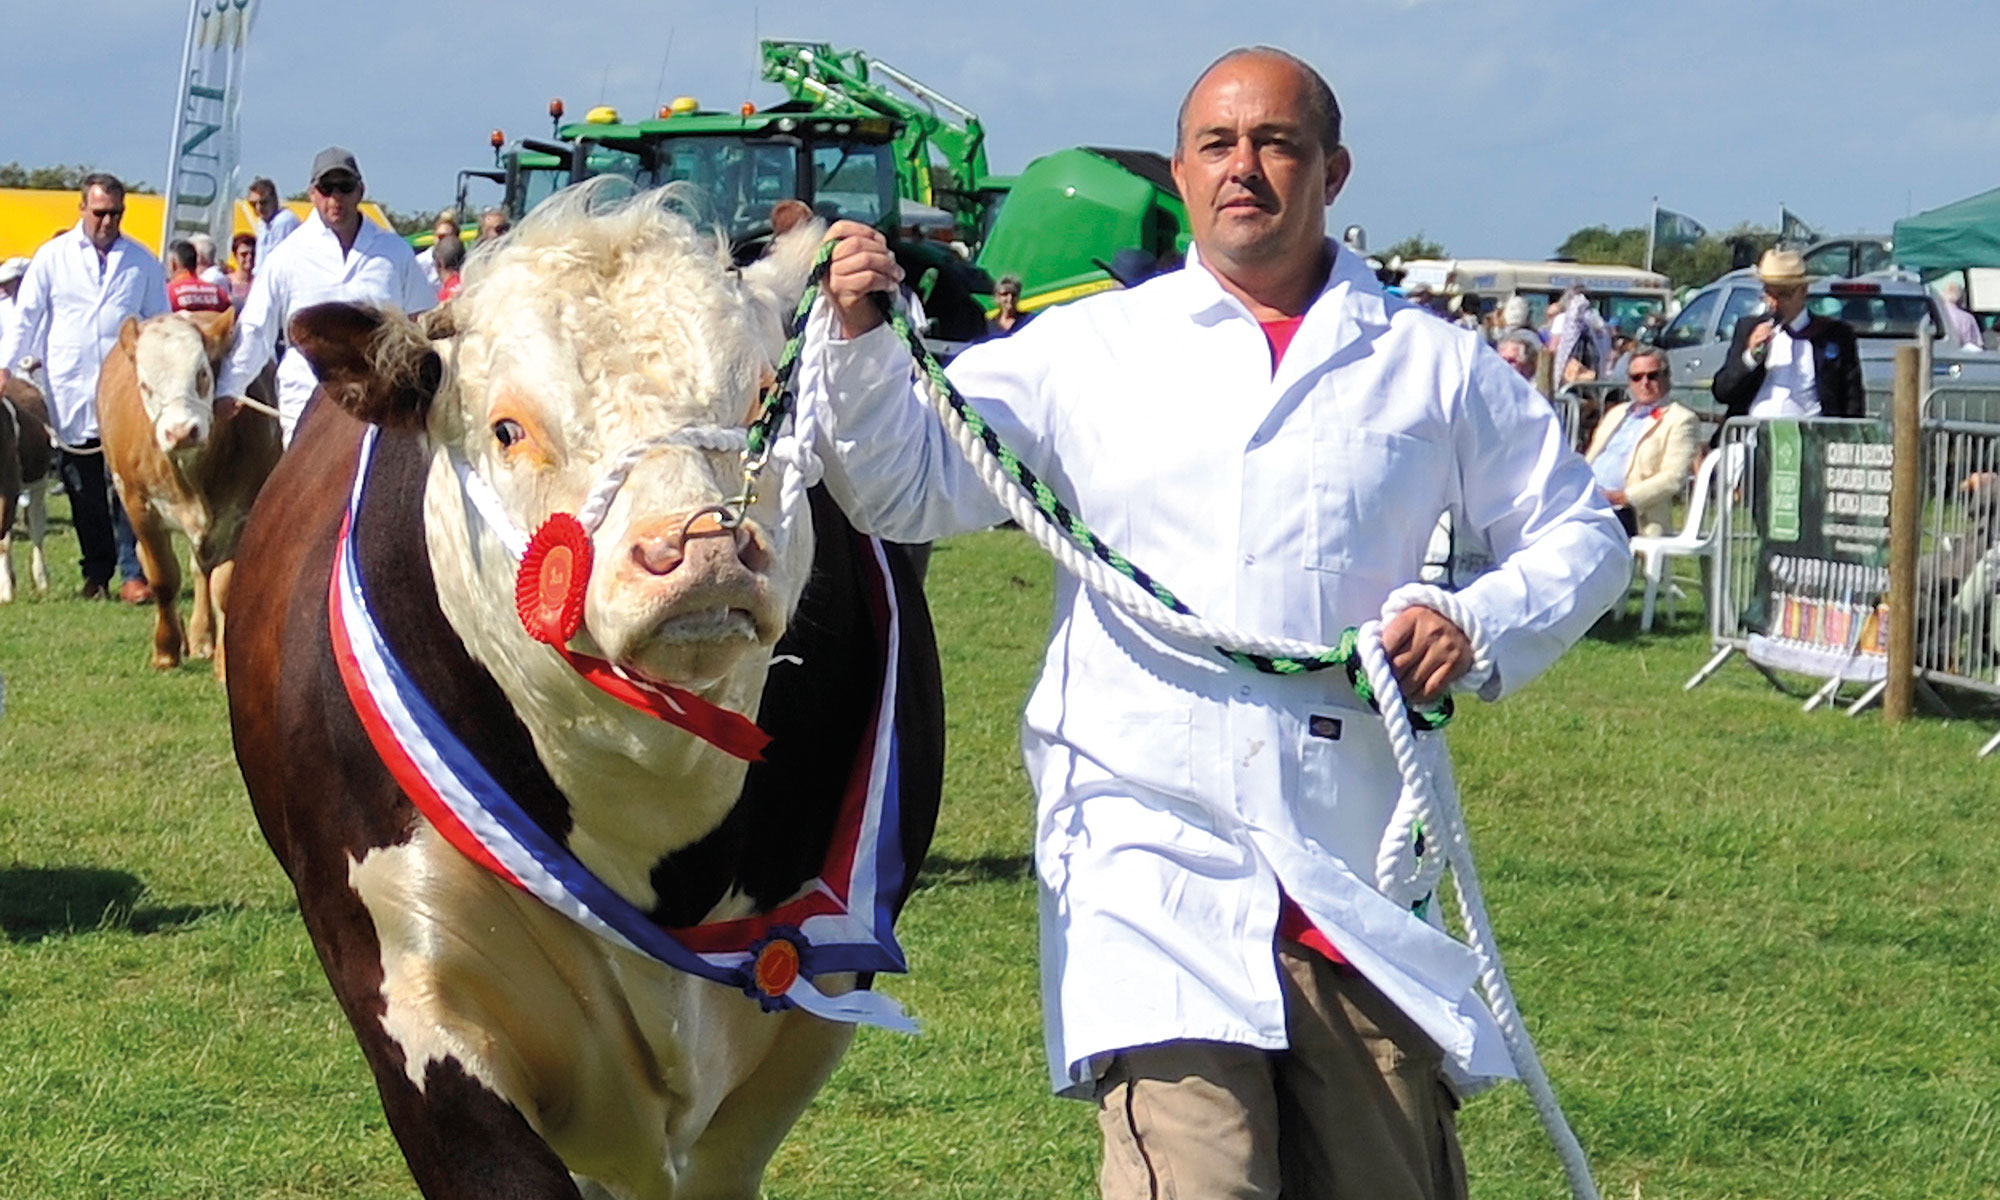 Farmer leading his prize cow to the ring